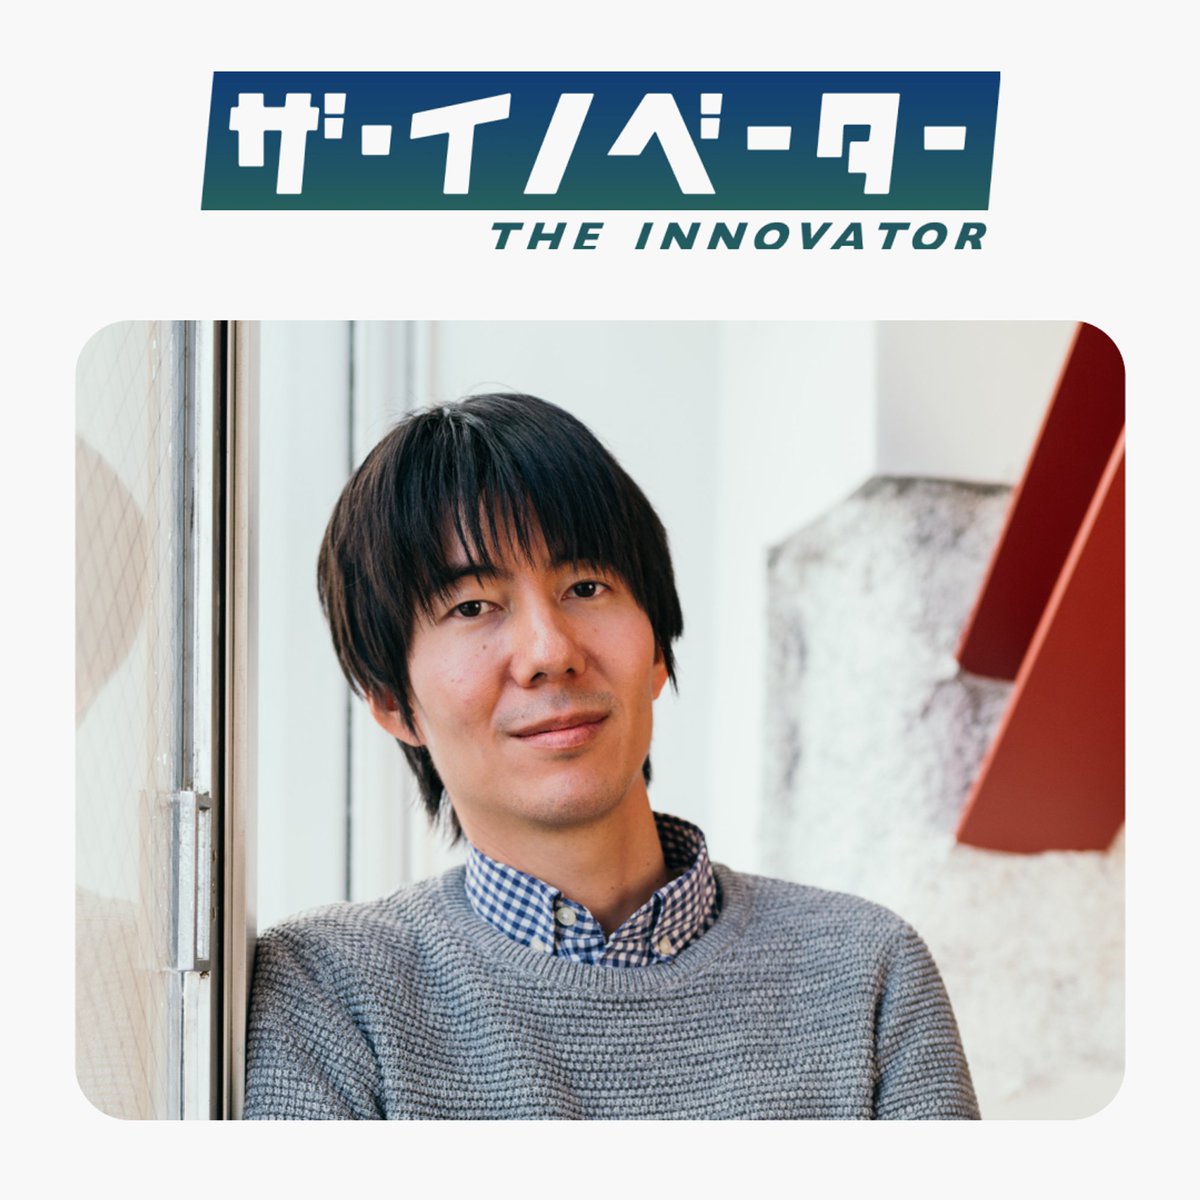 We're thrilled to share that our CEO was featured in The Innovator magazine, a prestigious publication highlighting Japan's top innovators. Read the full story: bit.ly/3S5Yj5h

#Socious #Leadership #JapanInnovation